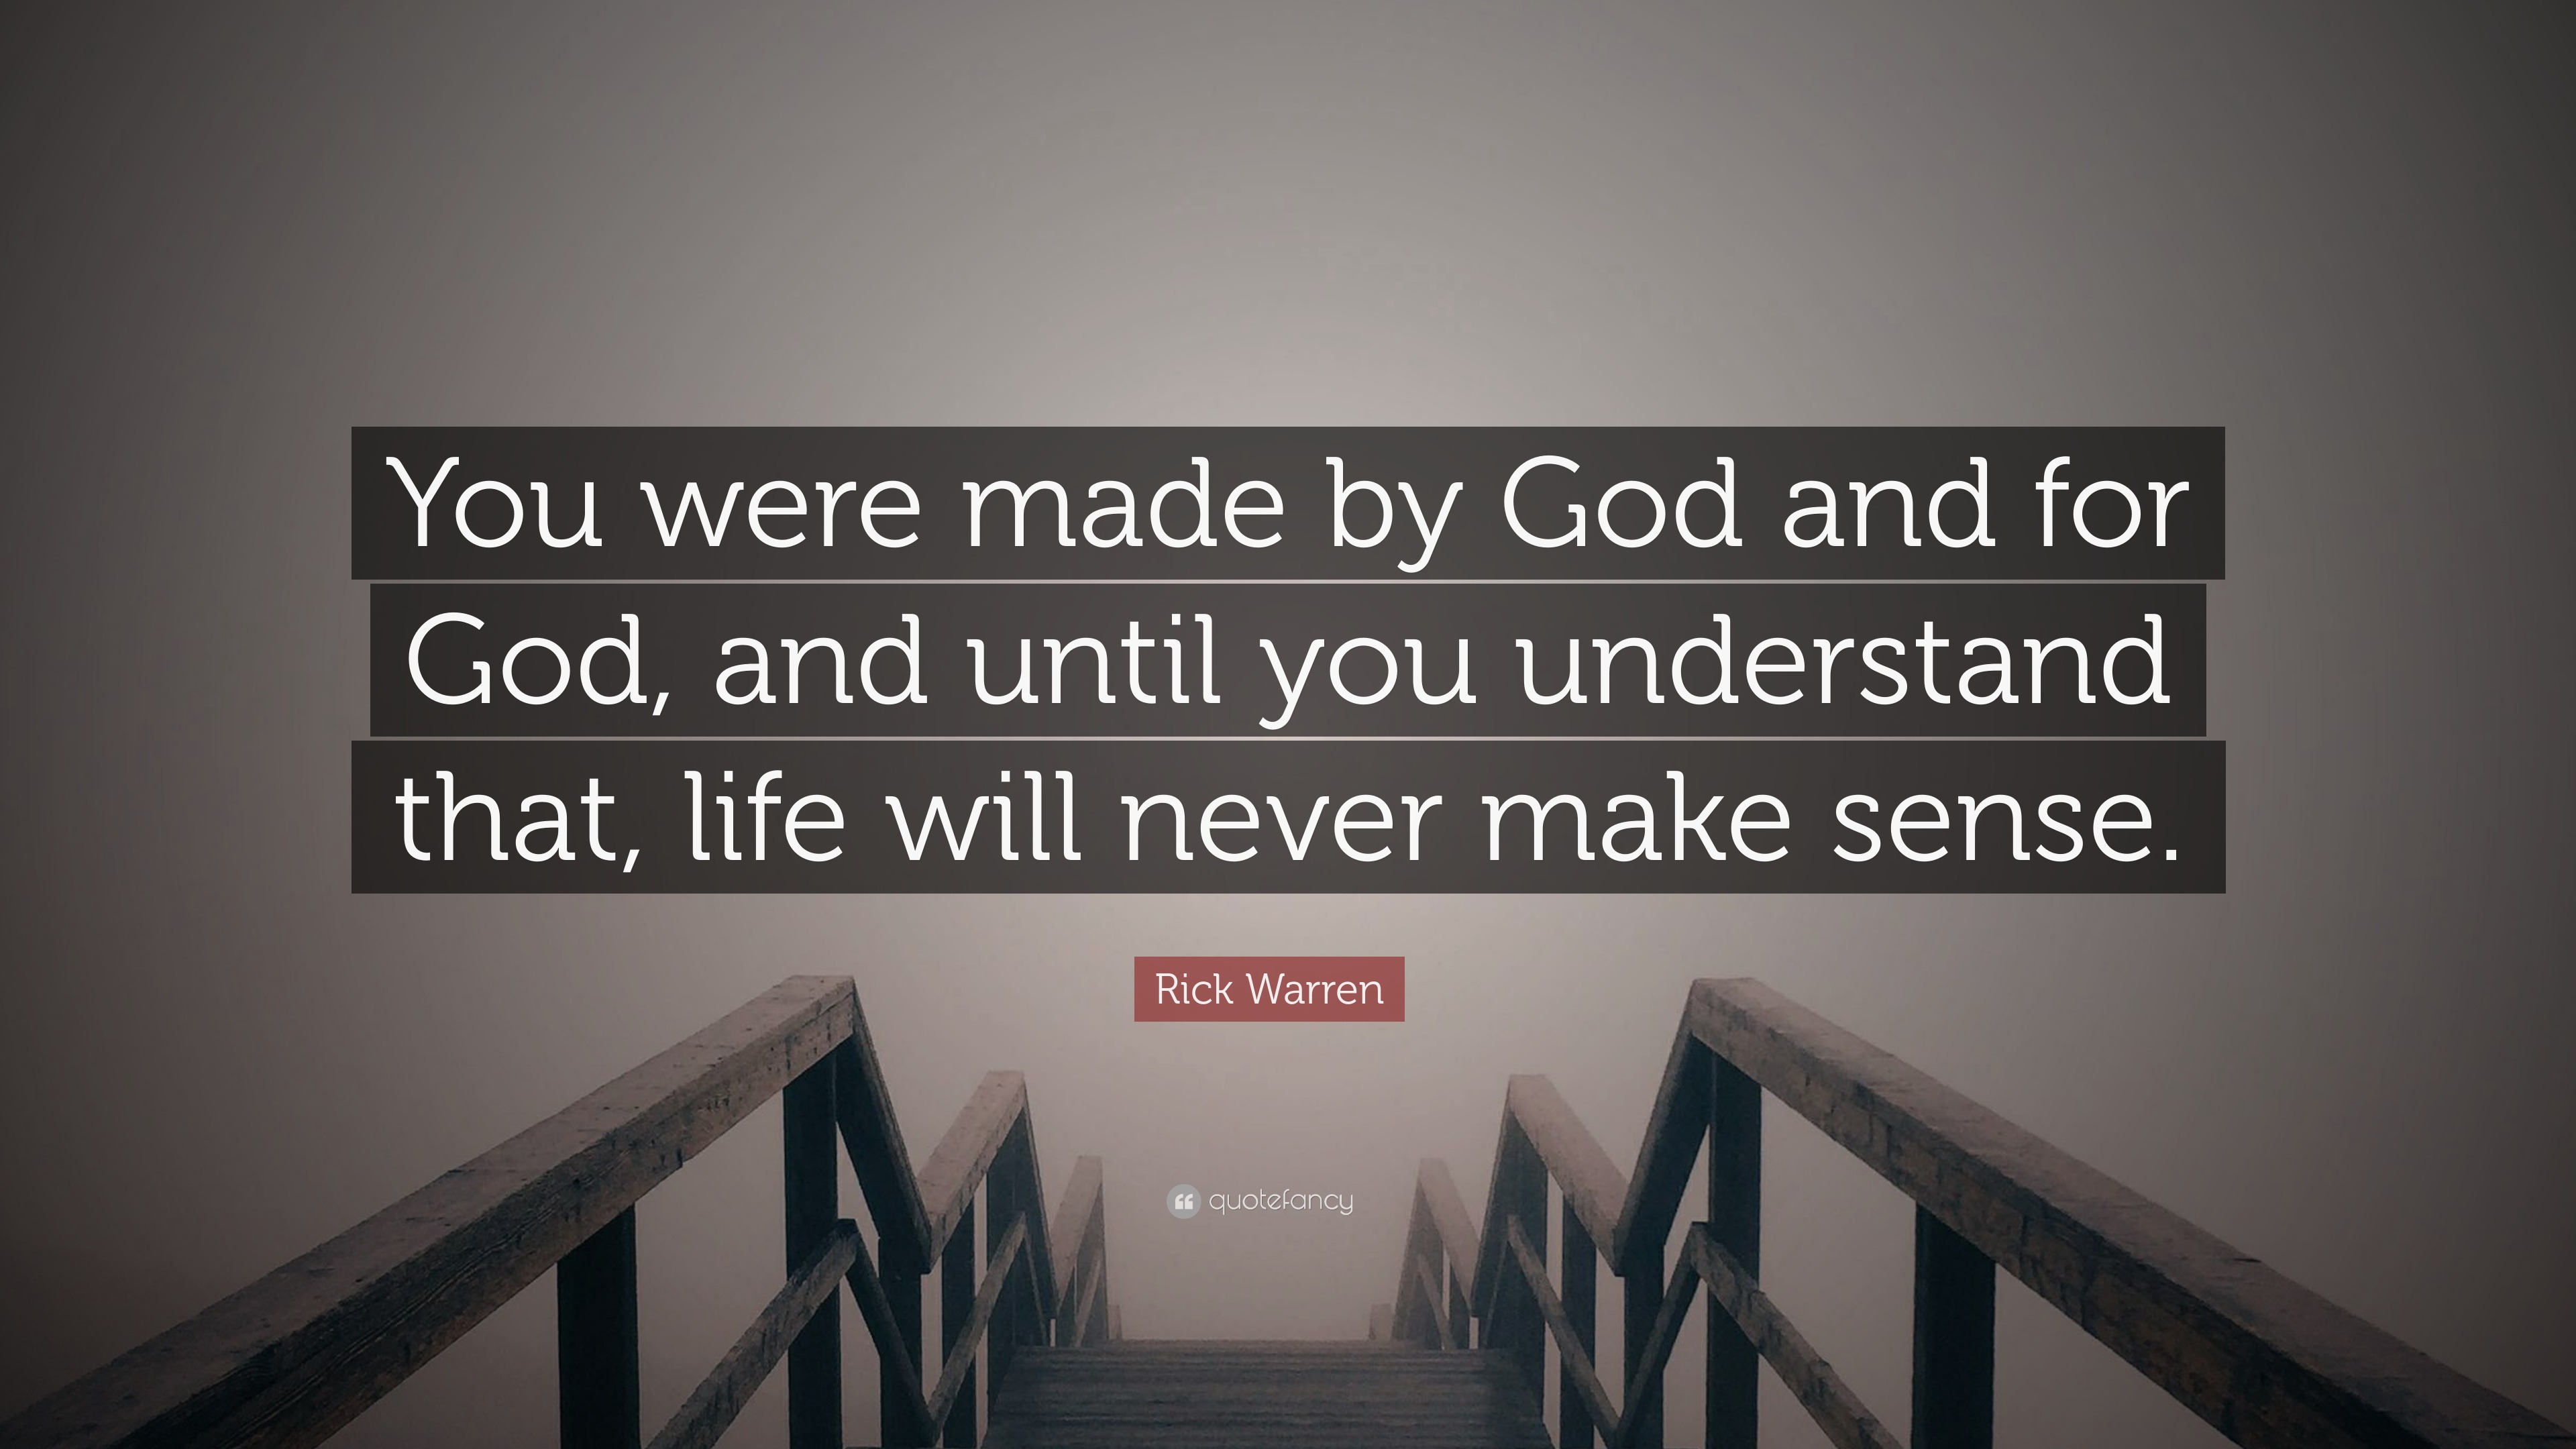 Rick Warren Quote “You were made by God and for God and until